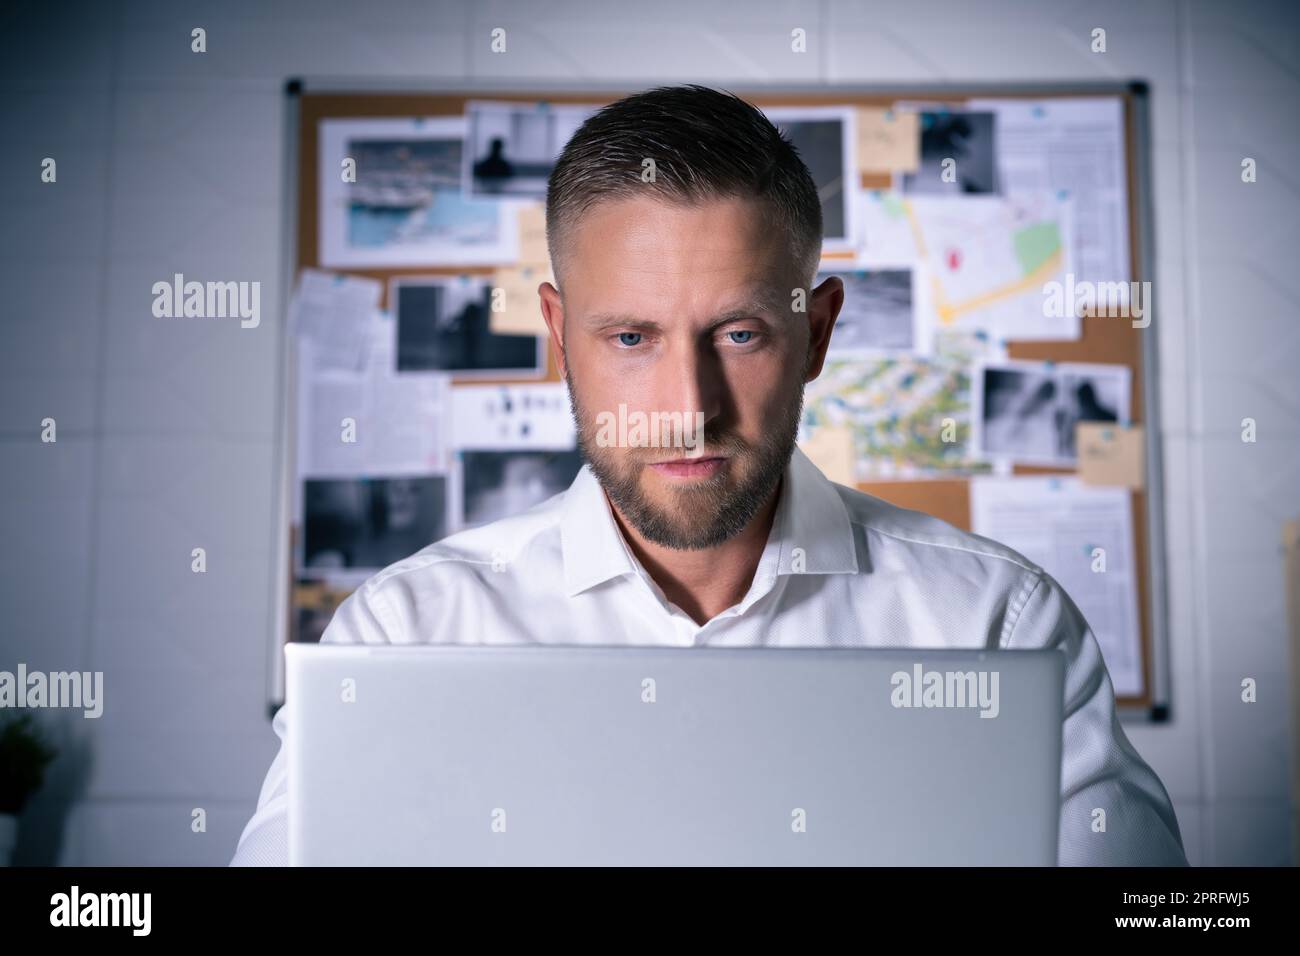 Private Detective Man Searching Online Stock Photo